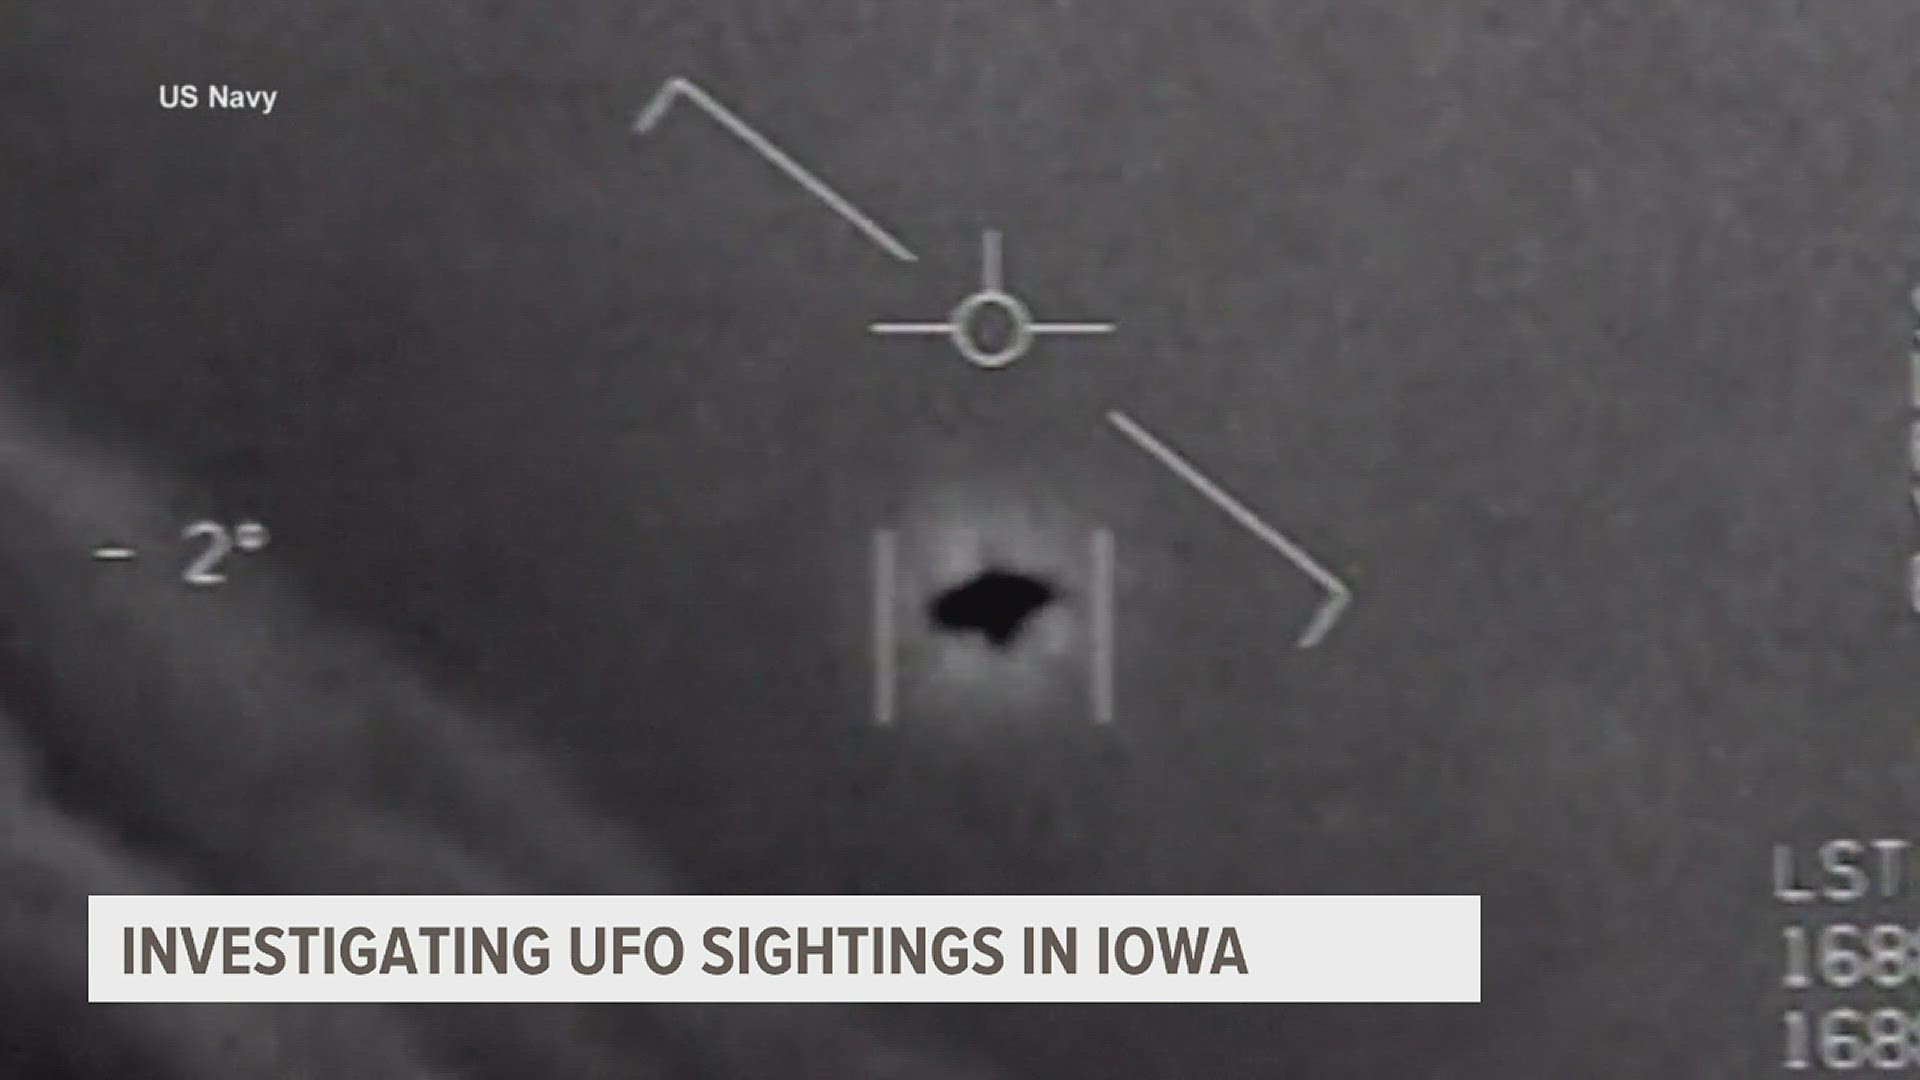 The Mutual UFO Network in Iowa receives an average of 40 reported sightings a year.